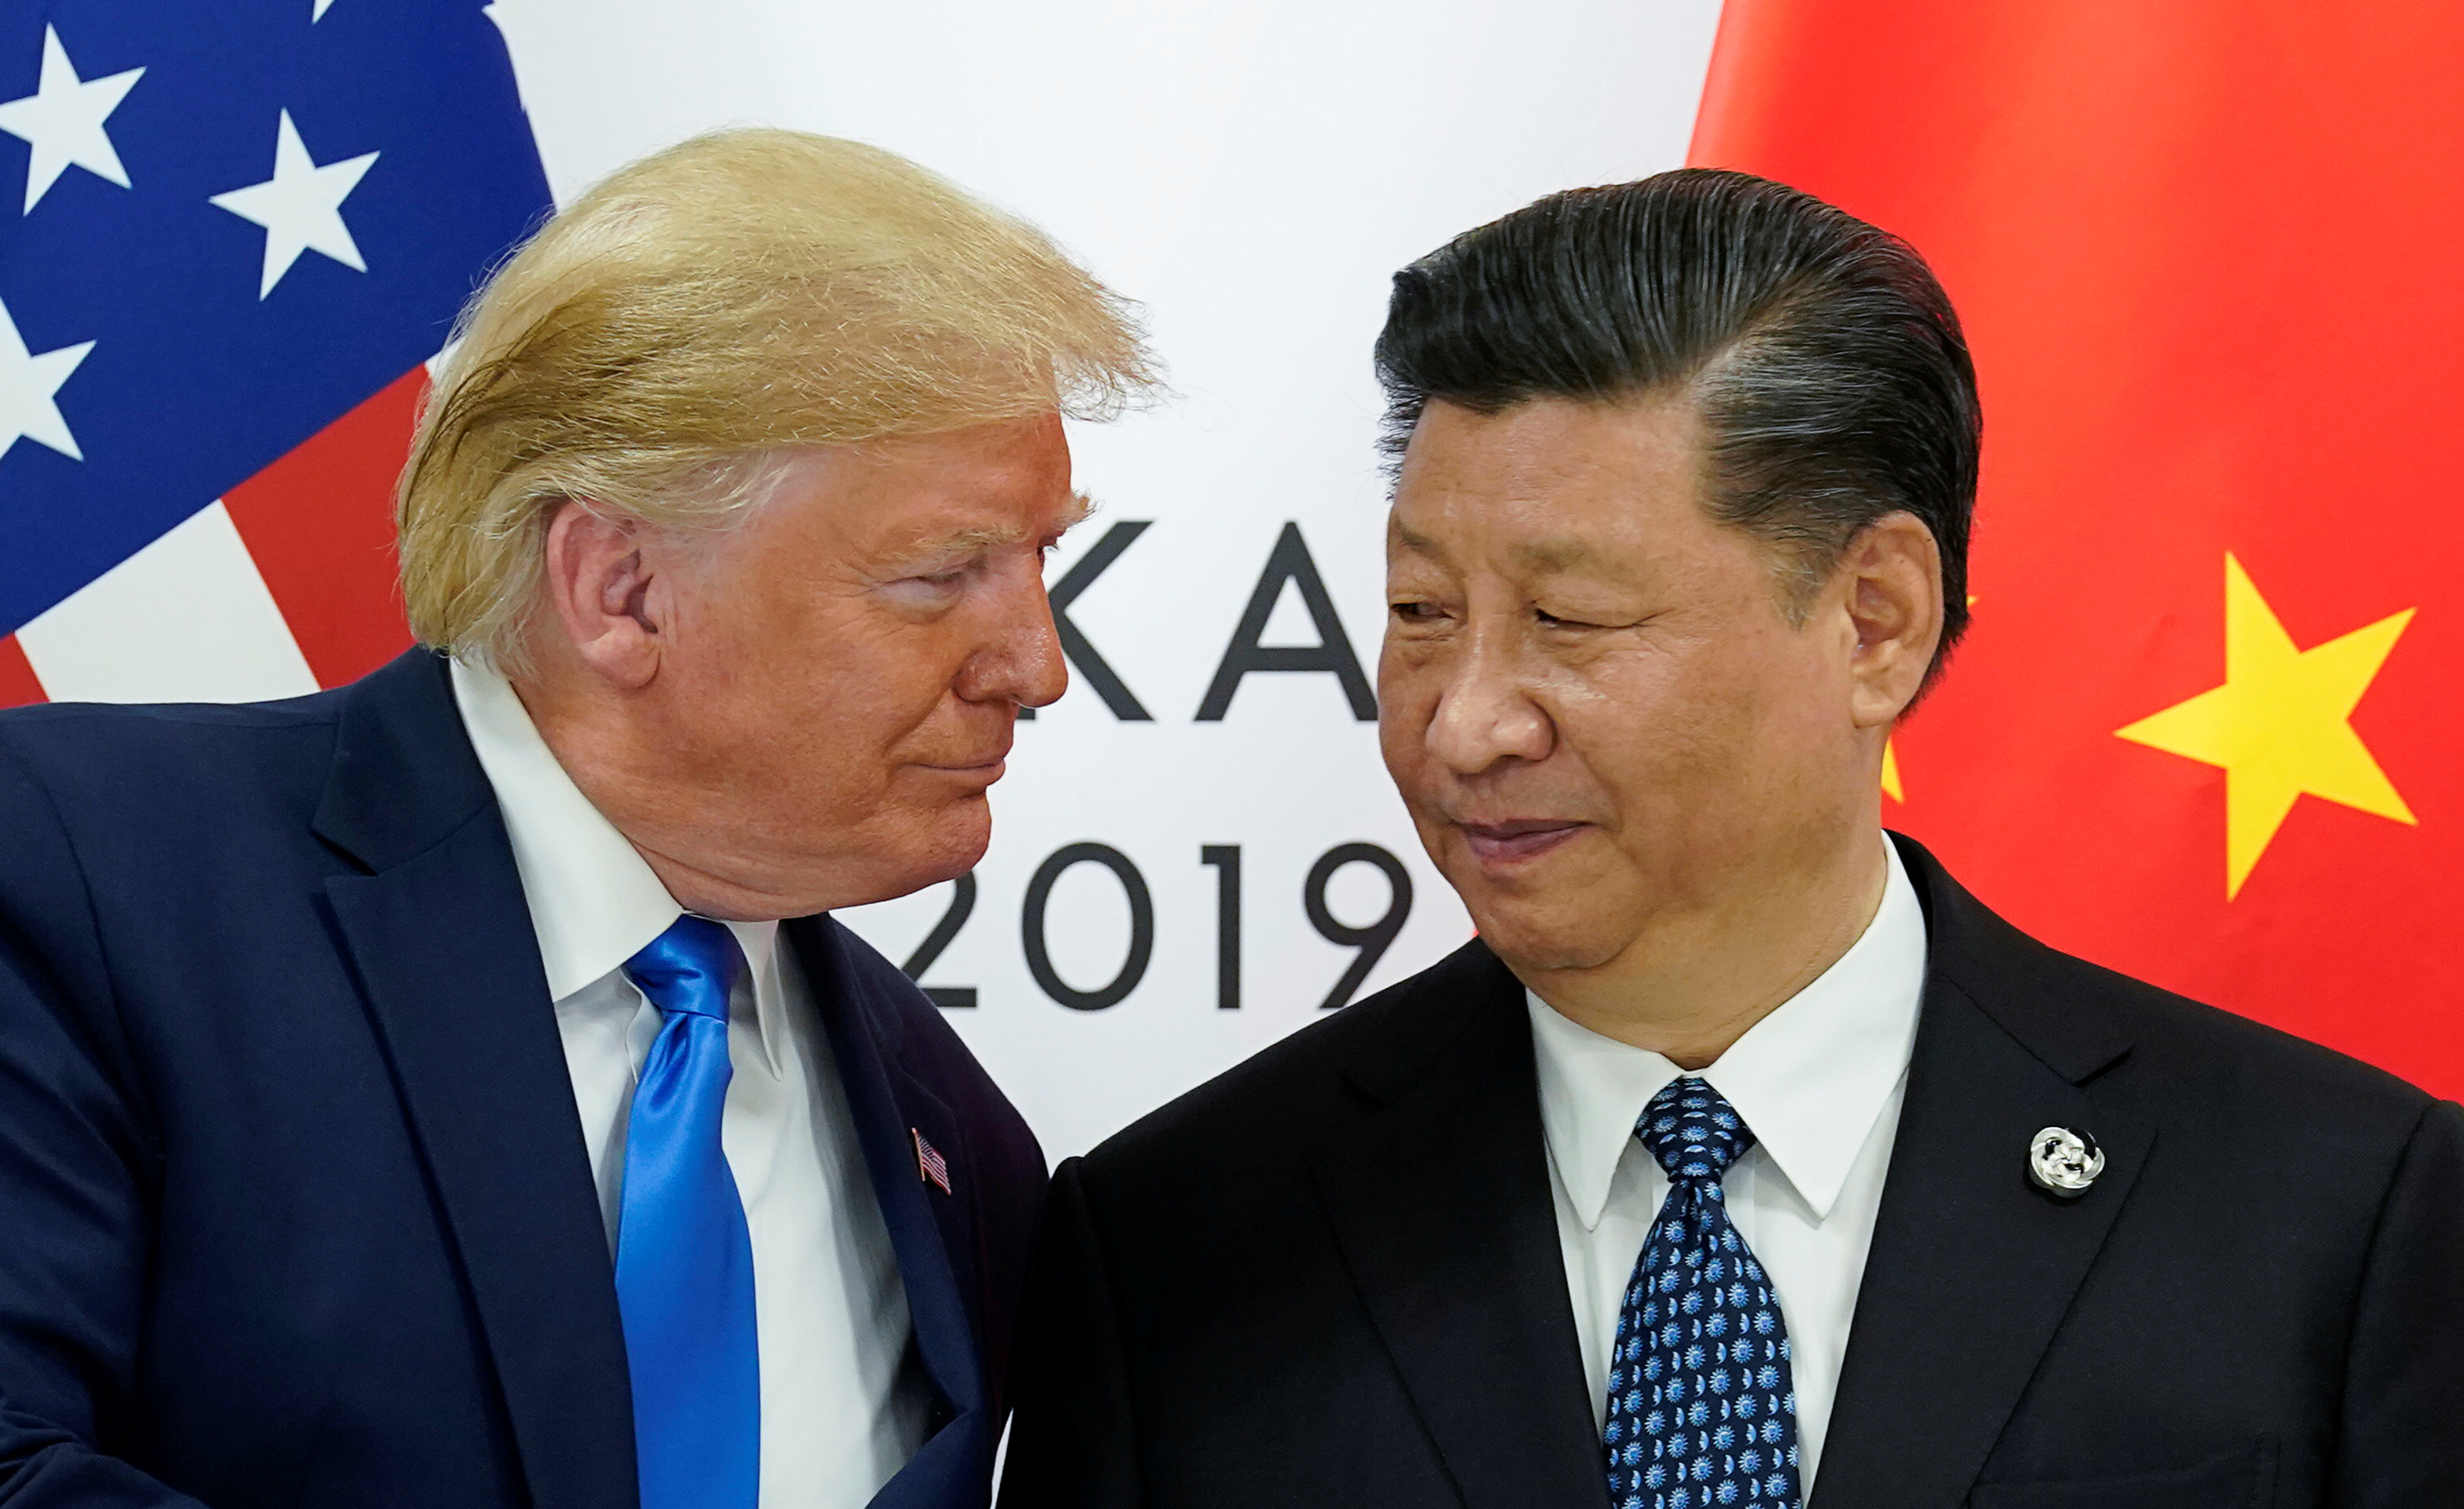 Phase One Trade Deal With China to be Signed in Washington January 15th- So Tweets President Trump